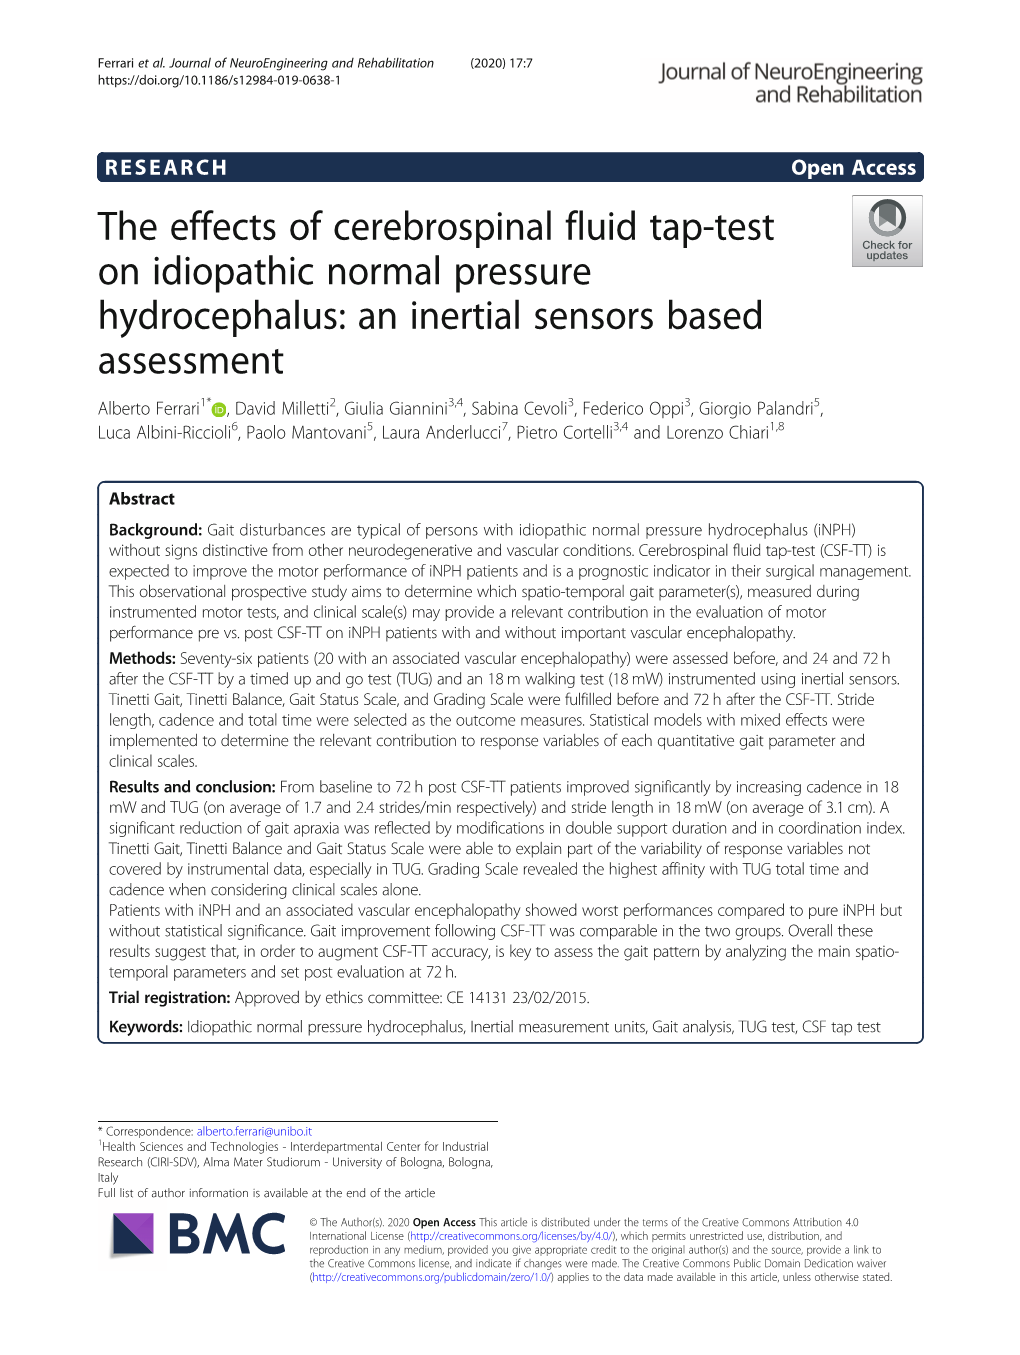 The Effects of Cerebrospinal Fluid Tap-Test on Idiopathic Normal